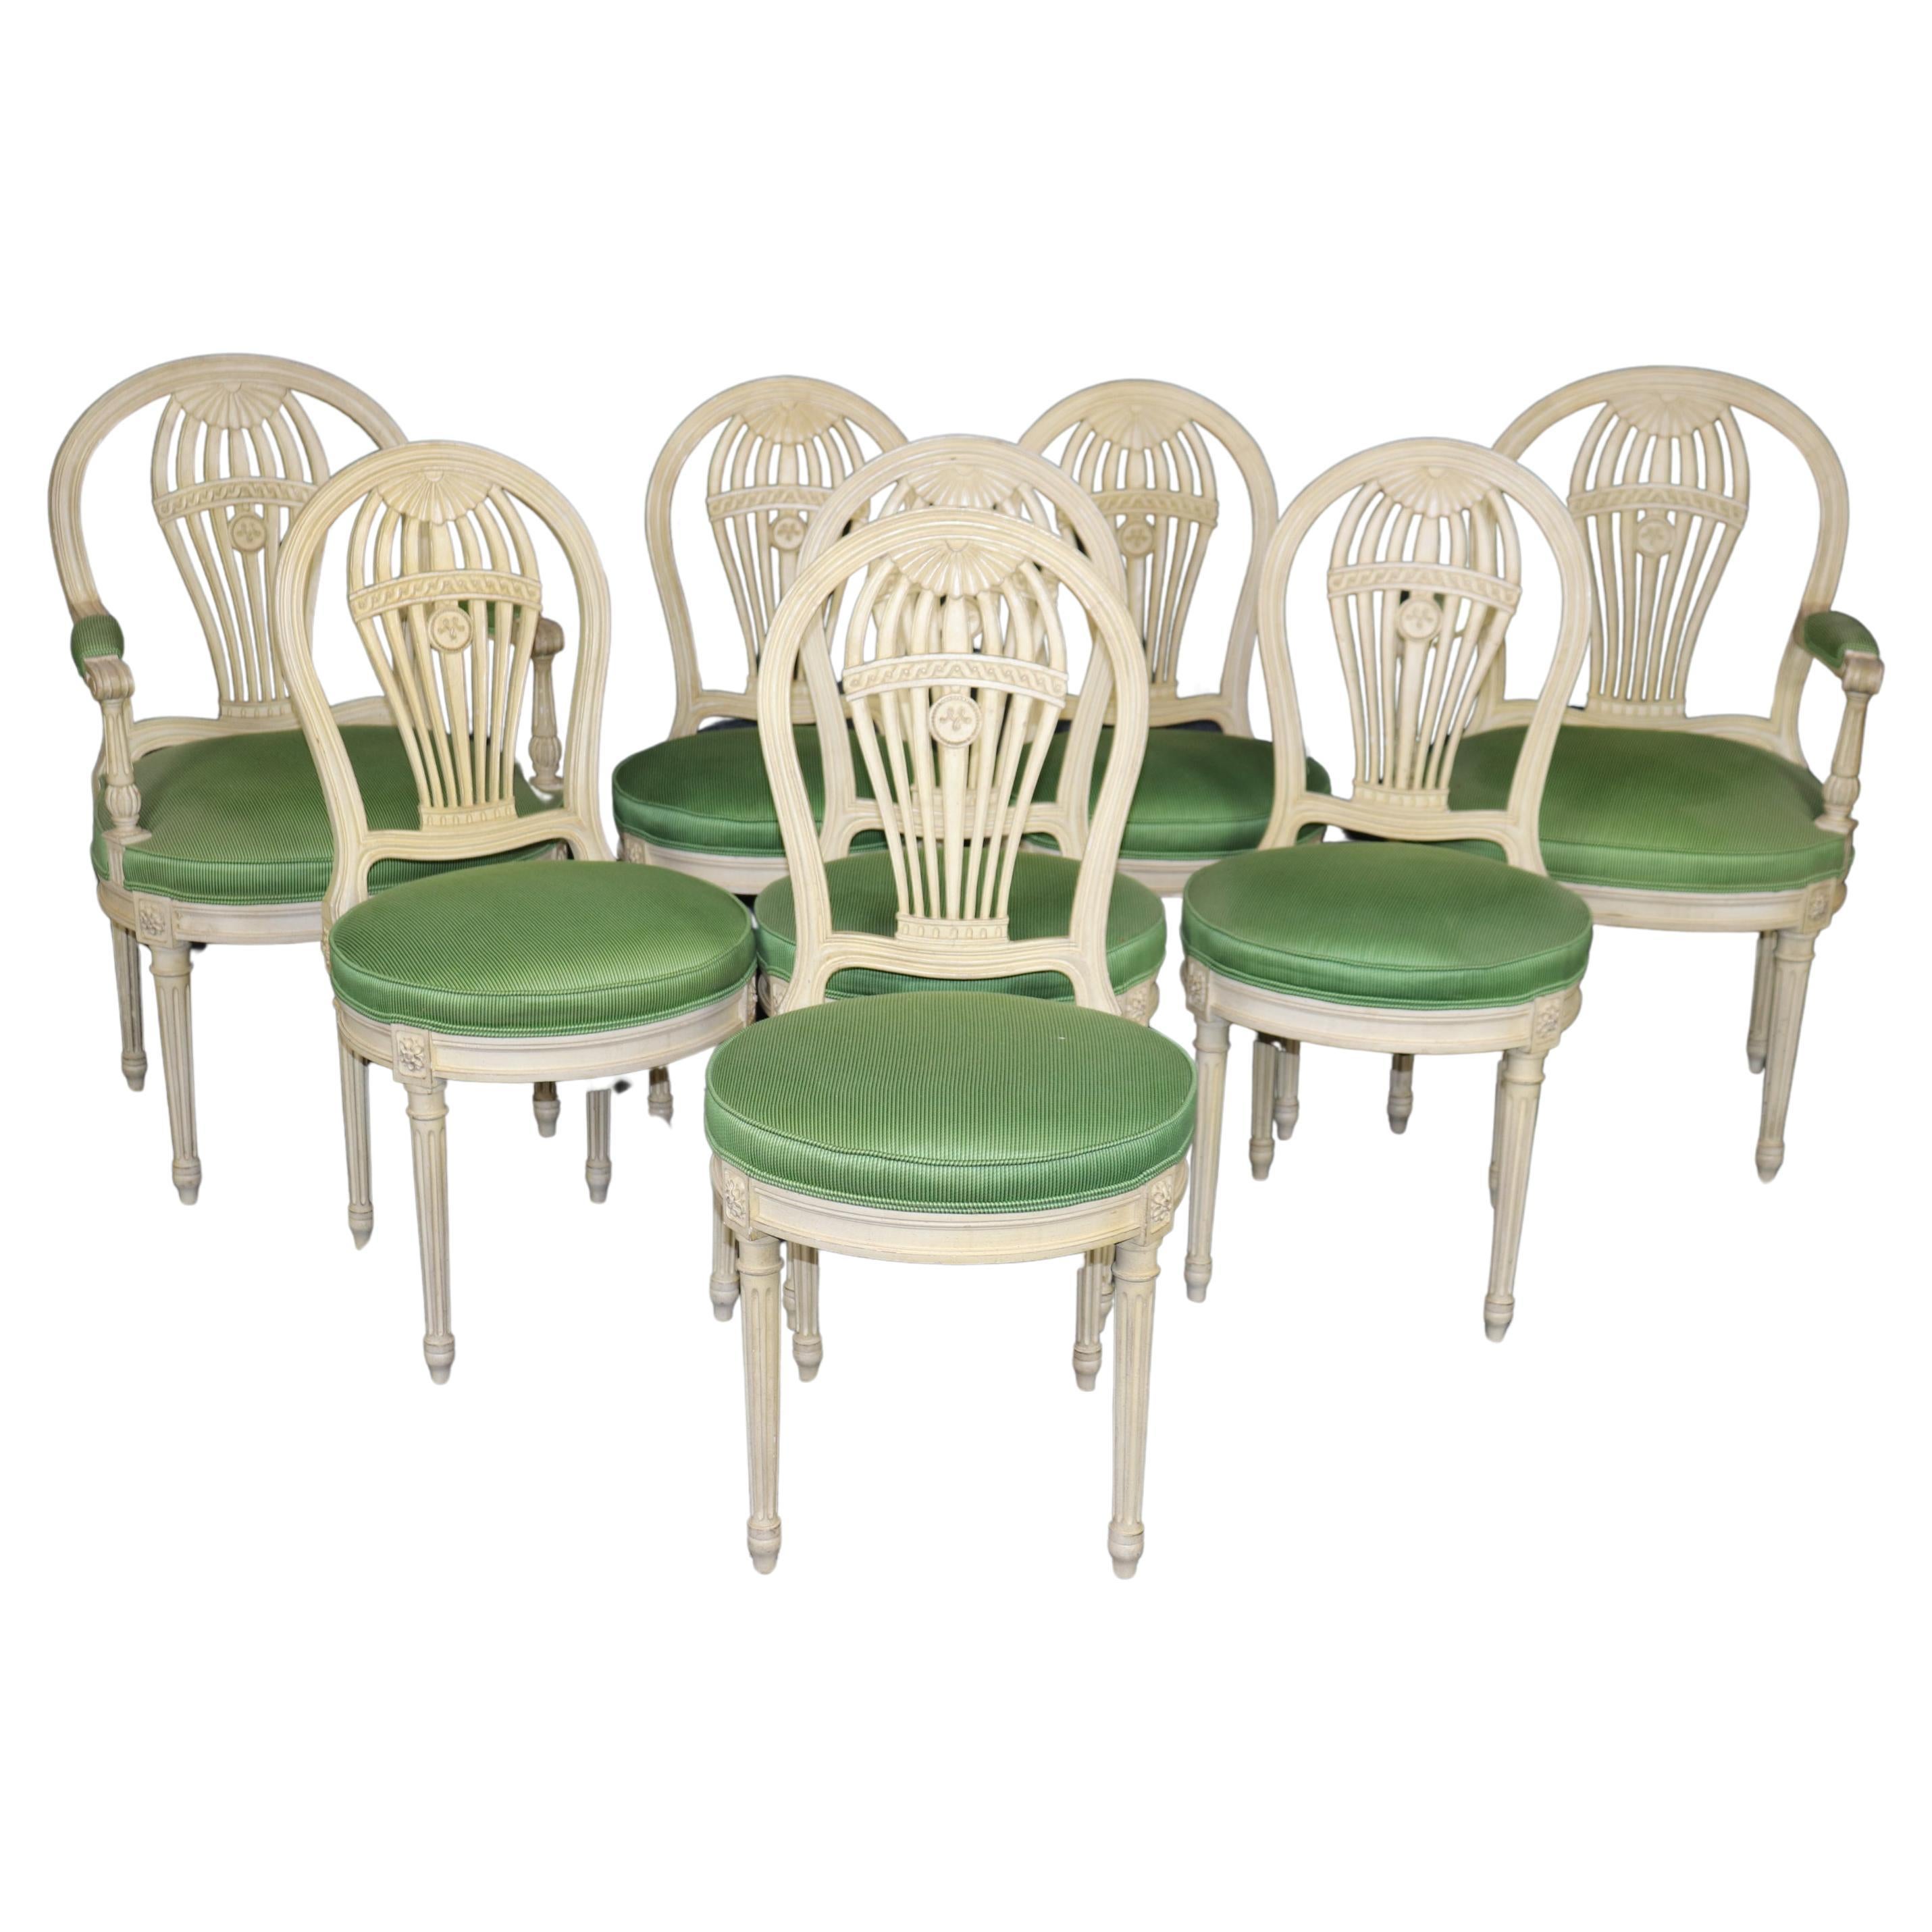 Set of 8 Magnificent Maison Jansen Attributed Balloon Back Painted Dining Chairs